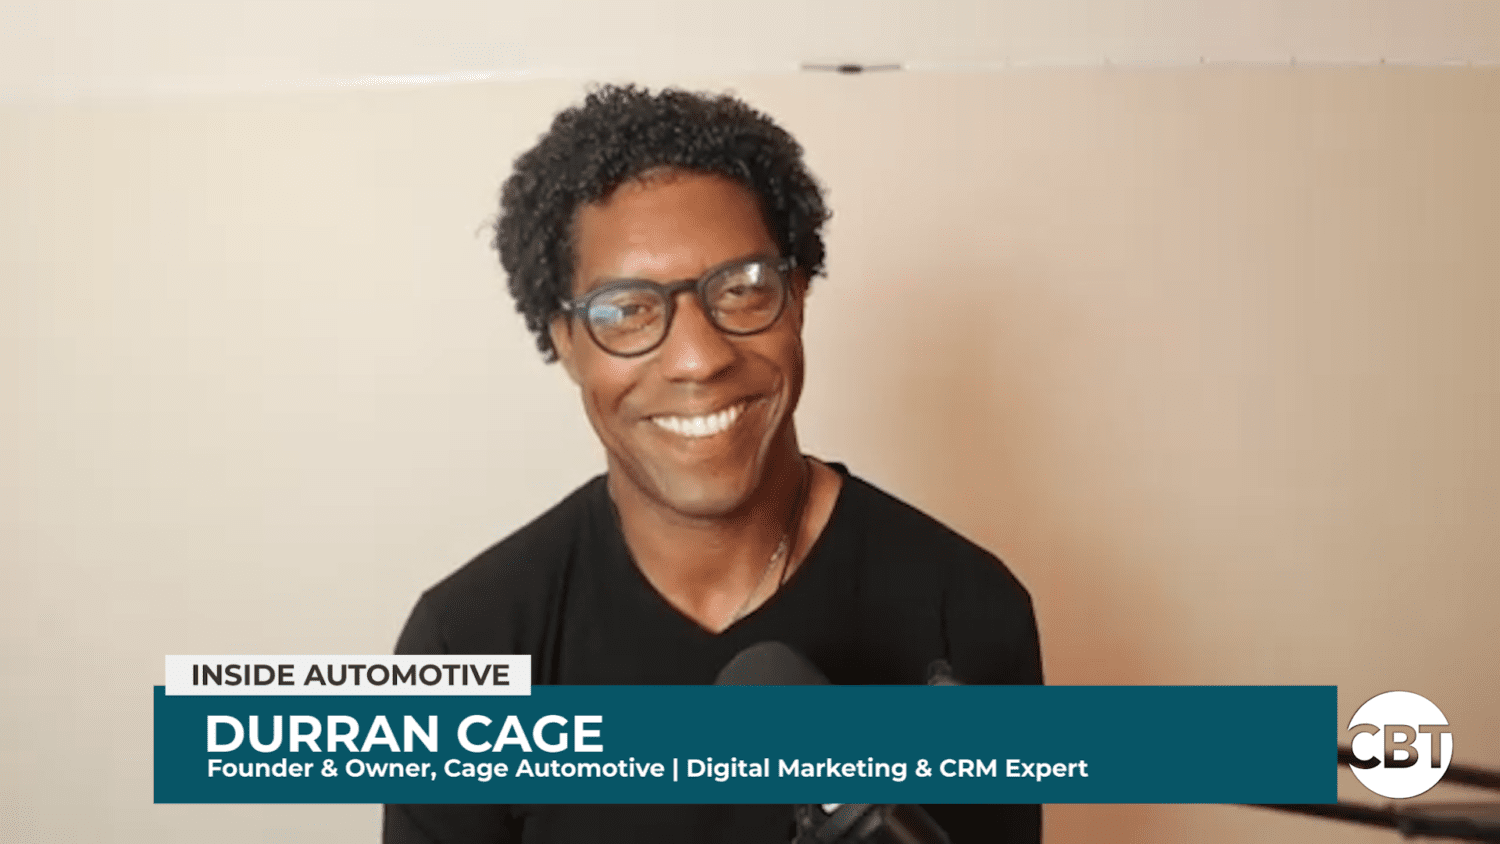 On today's episode of Inside Automotive, Durran Cage, the Founder and Owner of Cage Automotive, walks us through ways to better leverage tech